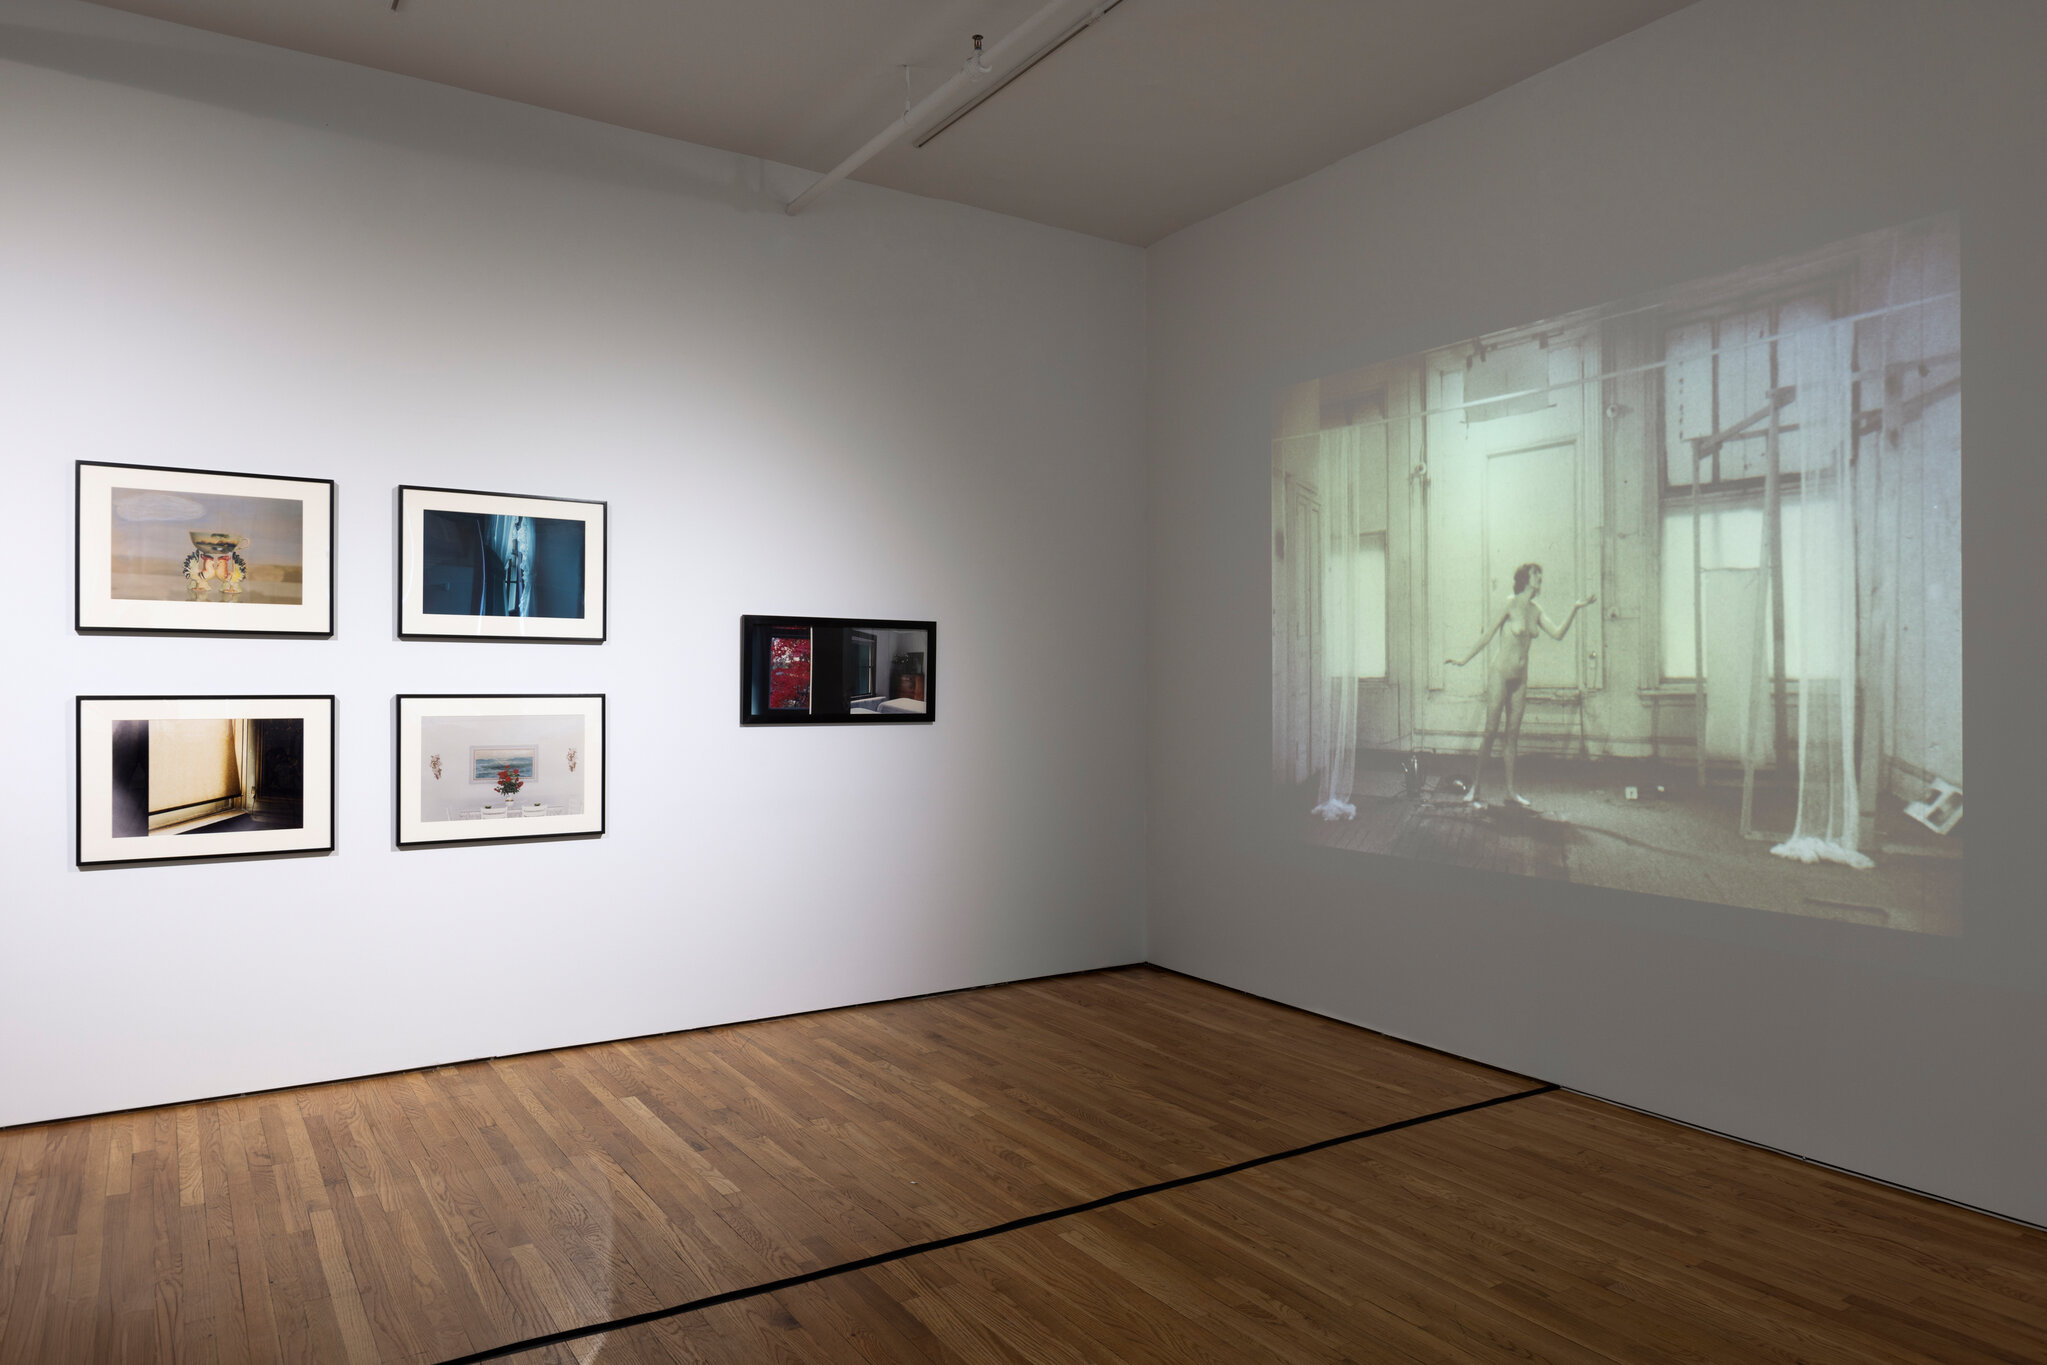 Contained Illusions: Experimental Films and Photography by Susan Brockman, 1965-1999, Soft Network, New York, 2024